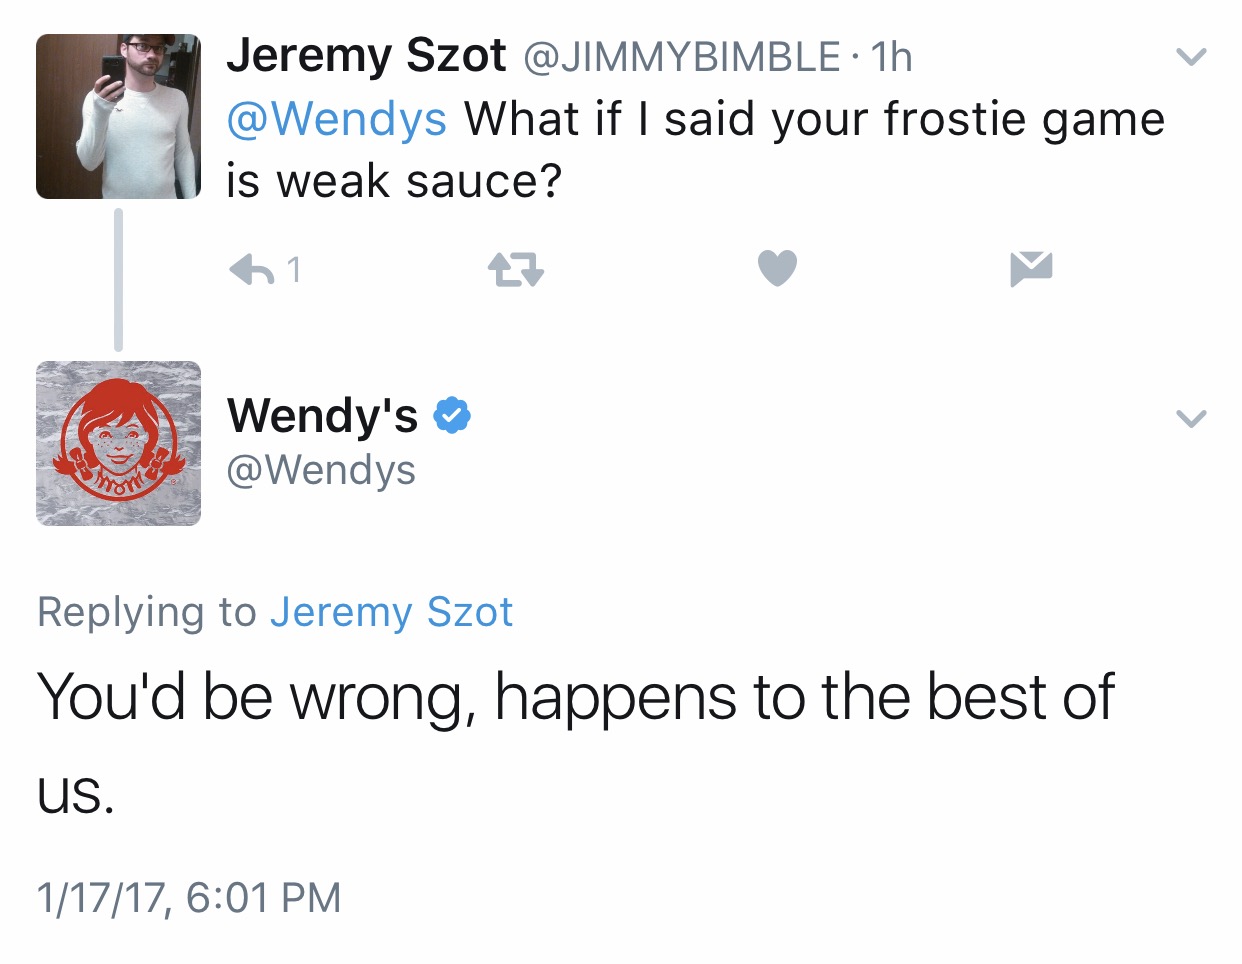 angle - Jeremy Szot 1h What if I said your frostie game is weak sauce? 61 7 Wendy's Jeremy Szot You'd be wrong, happens to the best of Us. 11717,